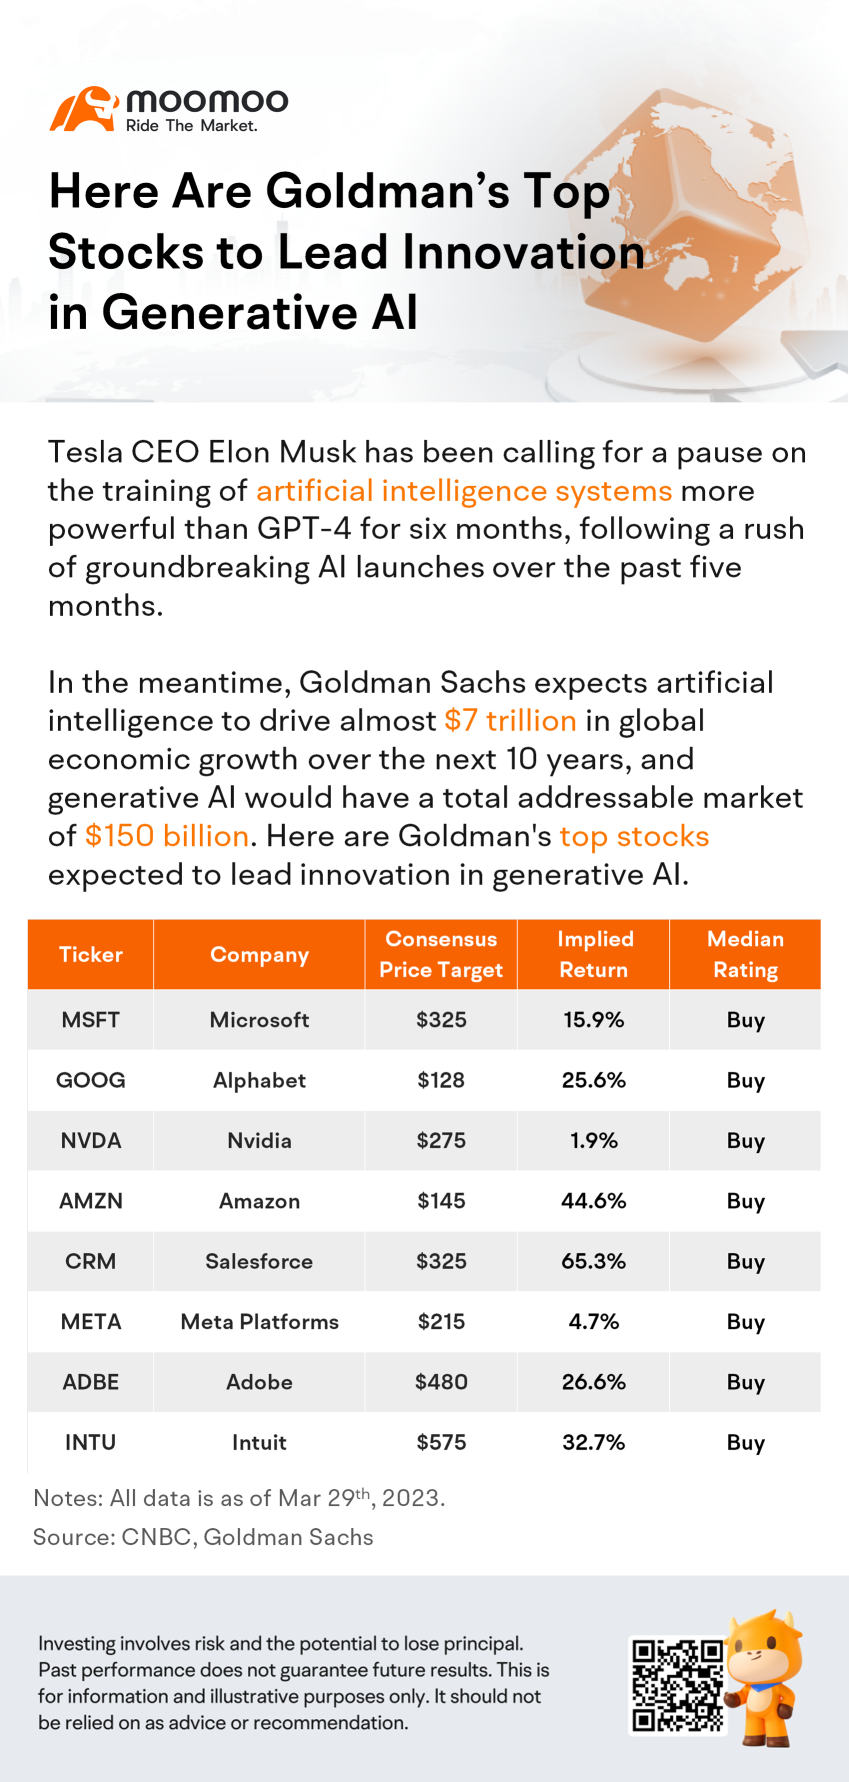 Here Are Goldman's Top Stocks to Lead Innovation in Generative AI